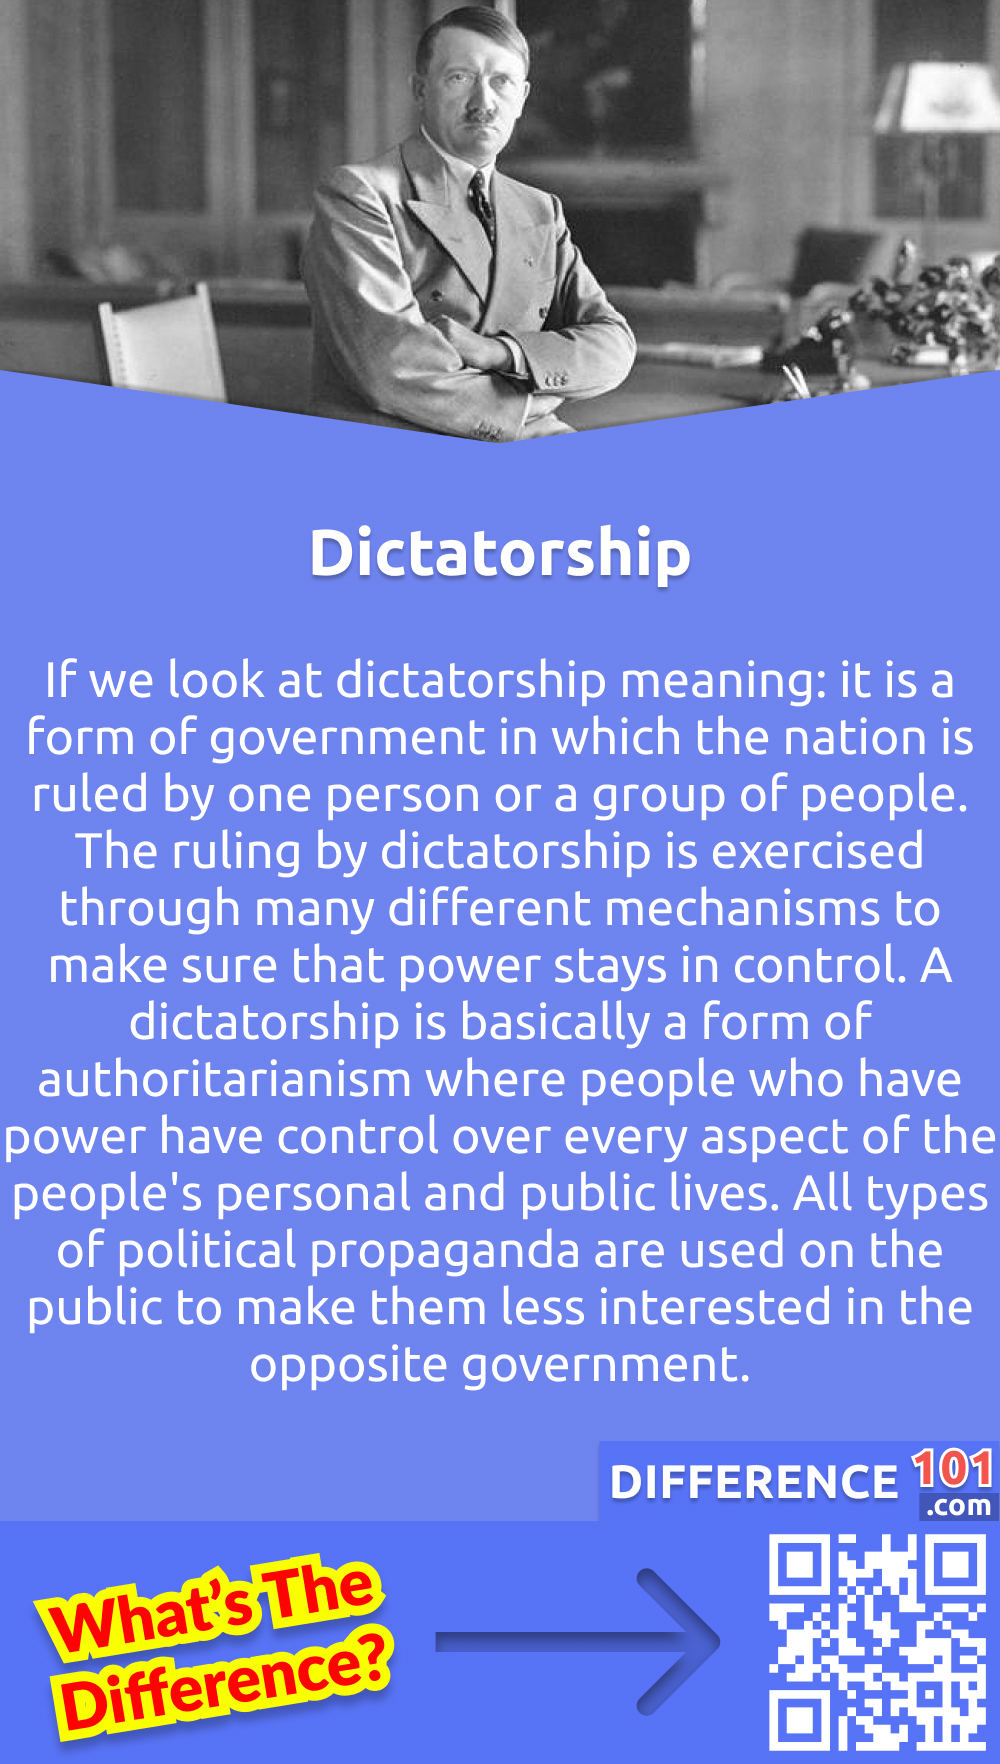 What Is Dictatorship? If we look at dictatorship meaning: it is a form of government in which the nation is ruled by one person or a group of people. The ruling by dictatorship is exercised through many different mechanisms to make sure that power stays in control. A dictatorship is basically a form of authoritarianism where people who have power have control over every aspect of the people's personal and public lives. All types of political propaganda are used on the public to make them less interested in the opposite government. Monarchy systems in the West employed various religious tactics to maintain their rule. Between the 10th and 20th centuries, the traditional monarchies declined. Elf-appointed leaders were backed by private armies. Which started a wave of military dictatorship in South America into the mid-20th century.